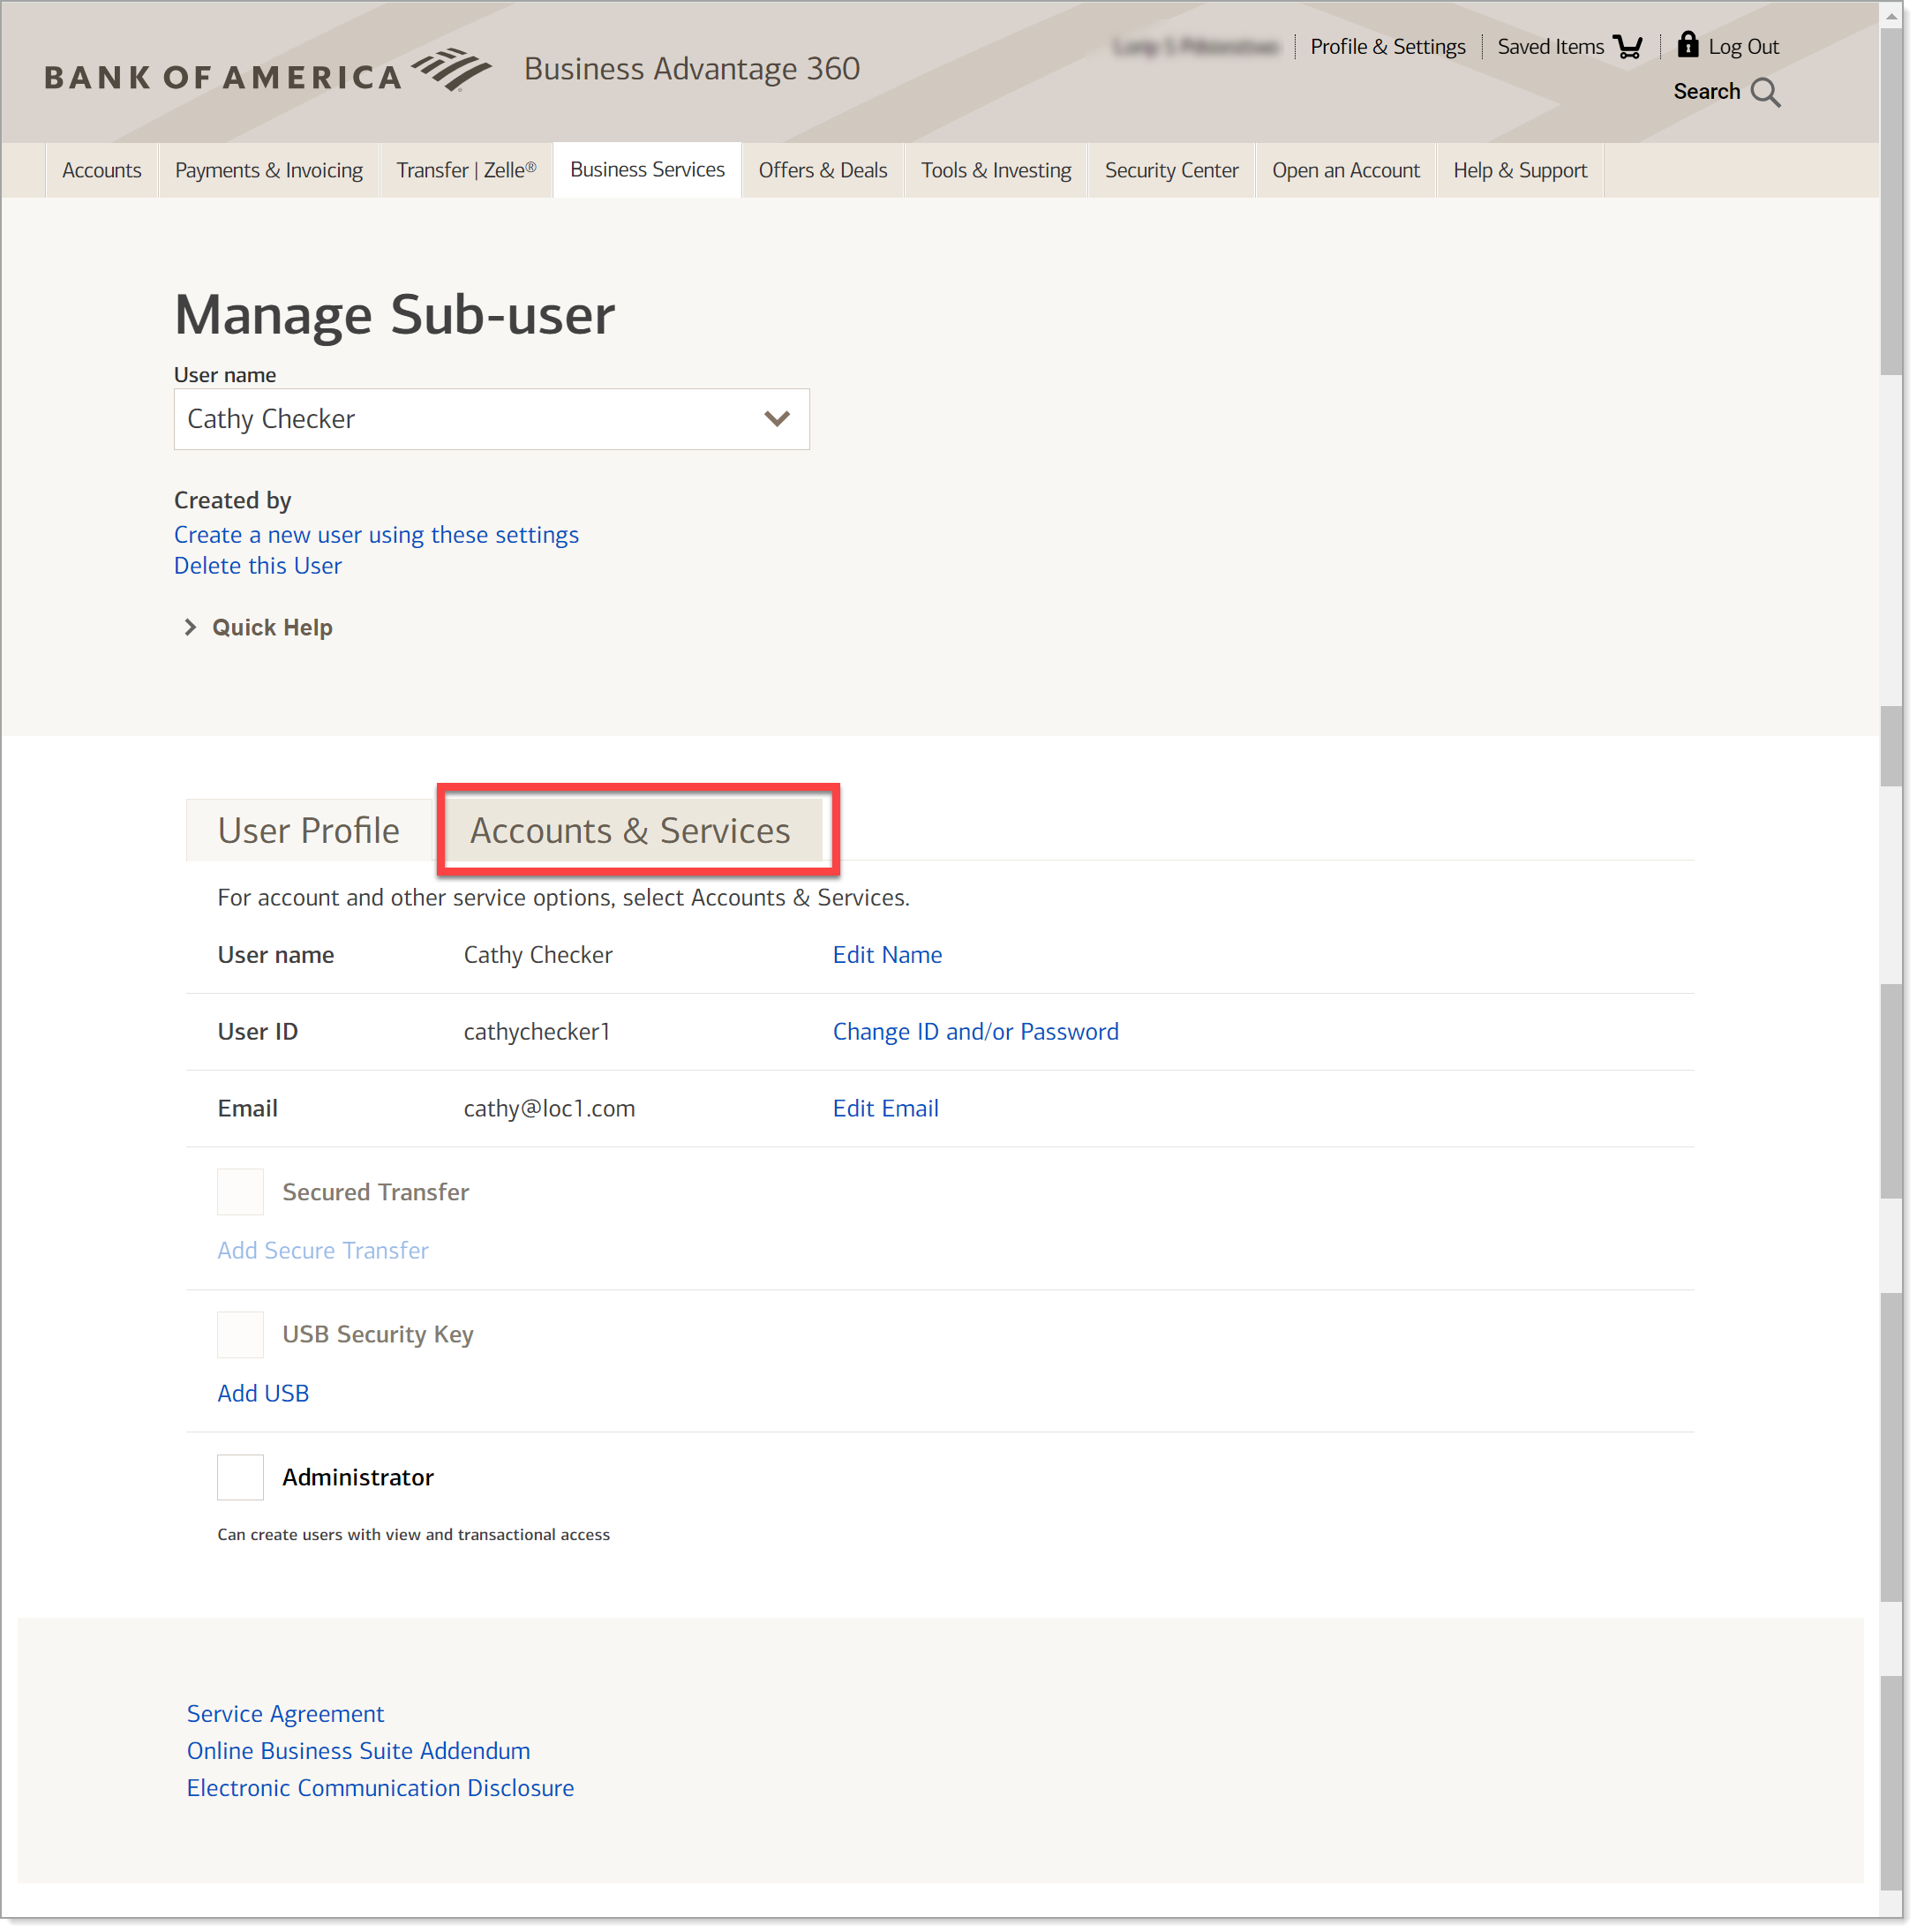 Manage sub-user accounts and services tab